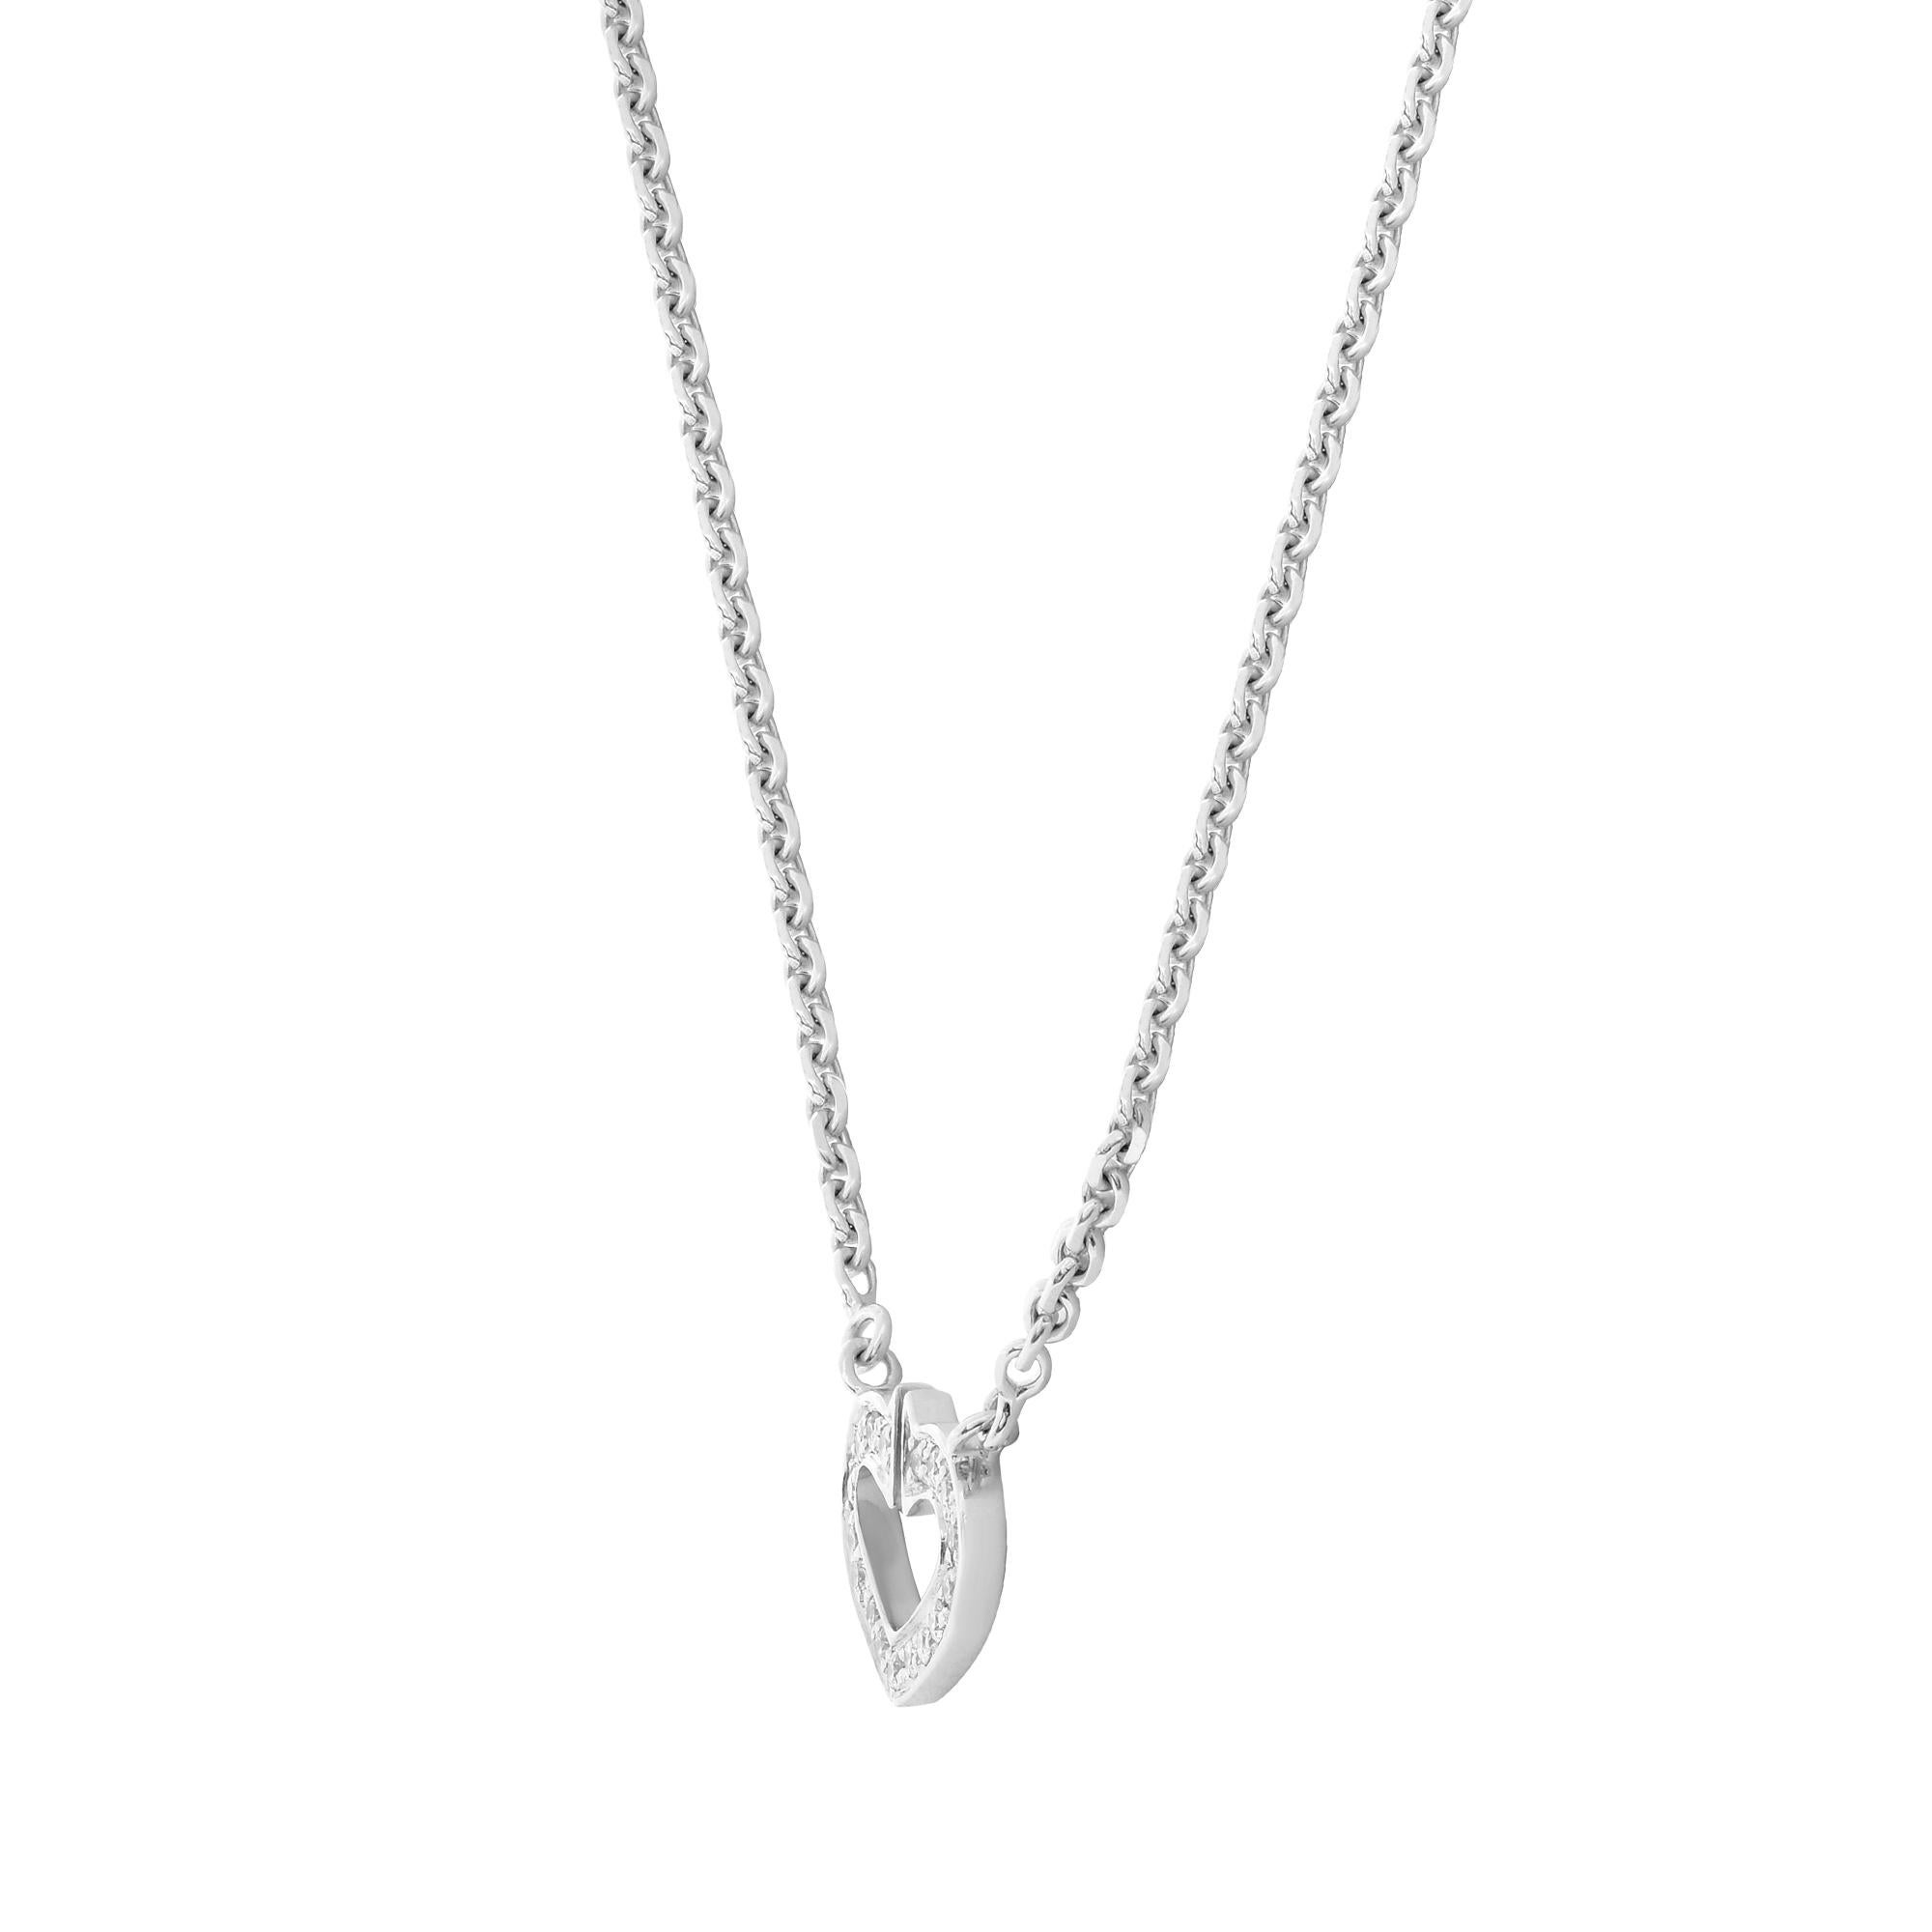 Cartier 18k white gold Coeur C de diamond Heart necklace. This necklace is from the Heart and Symbols Cartier collection.  A precious diamond heart pendant with approximately 0.09ctw diamonds sits at the center of this 18k white gold necklace.